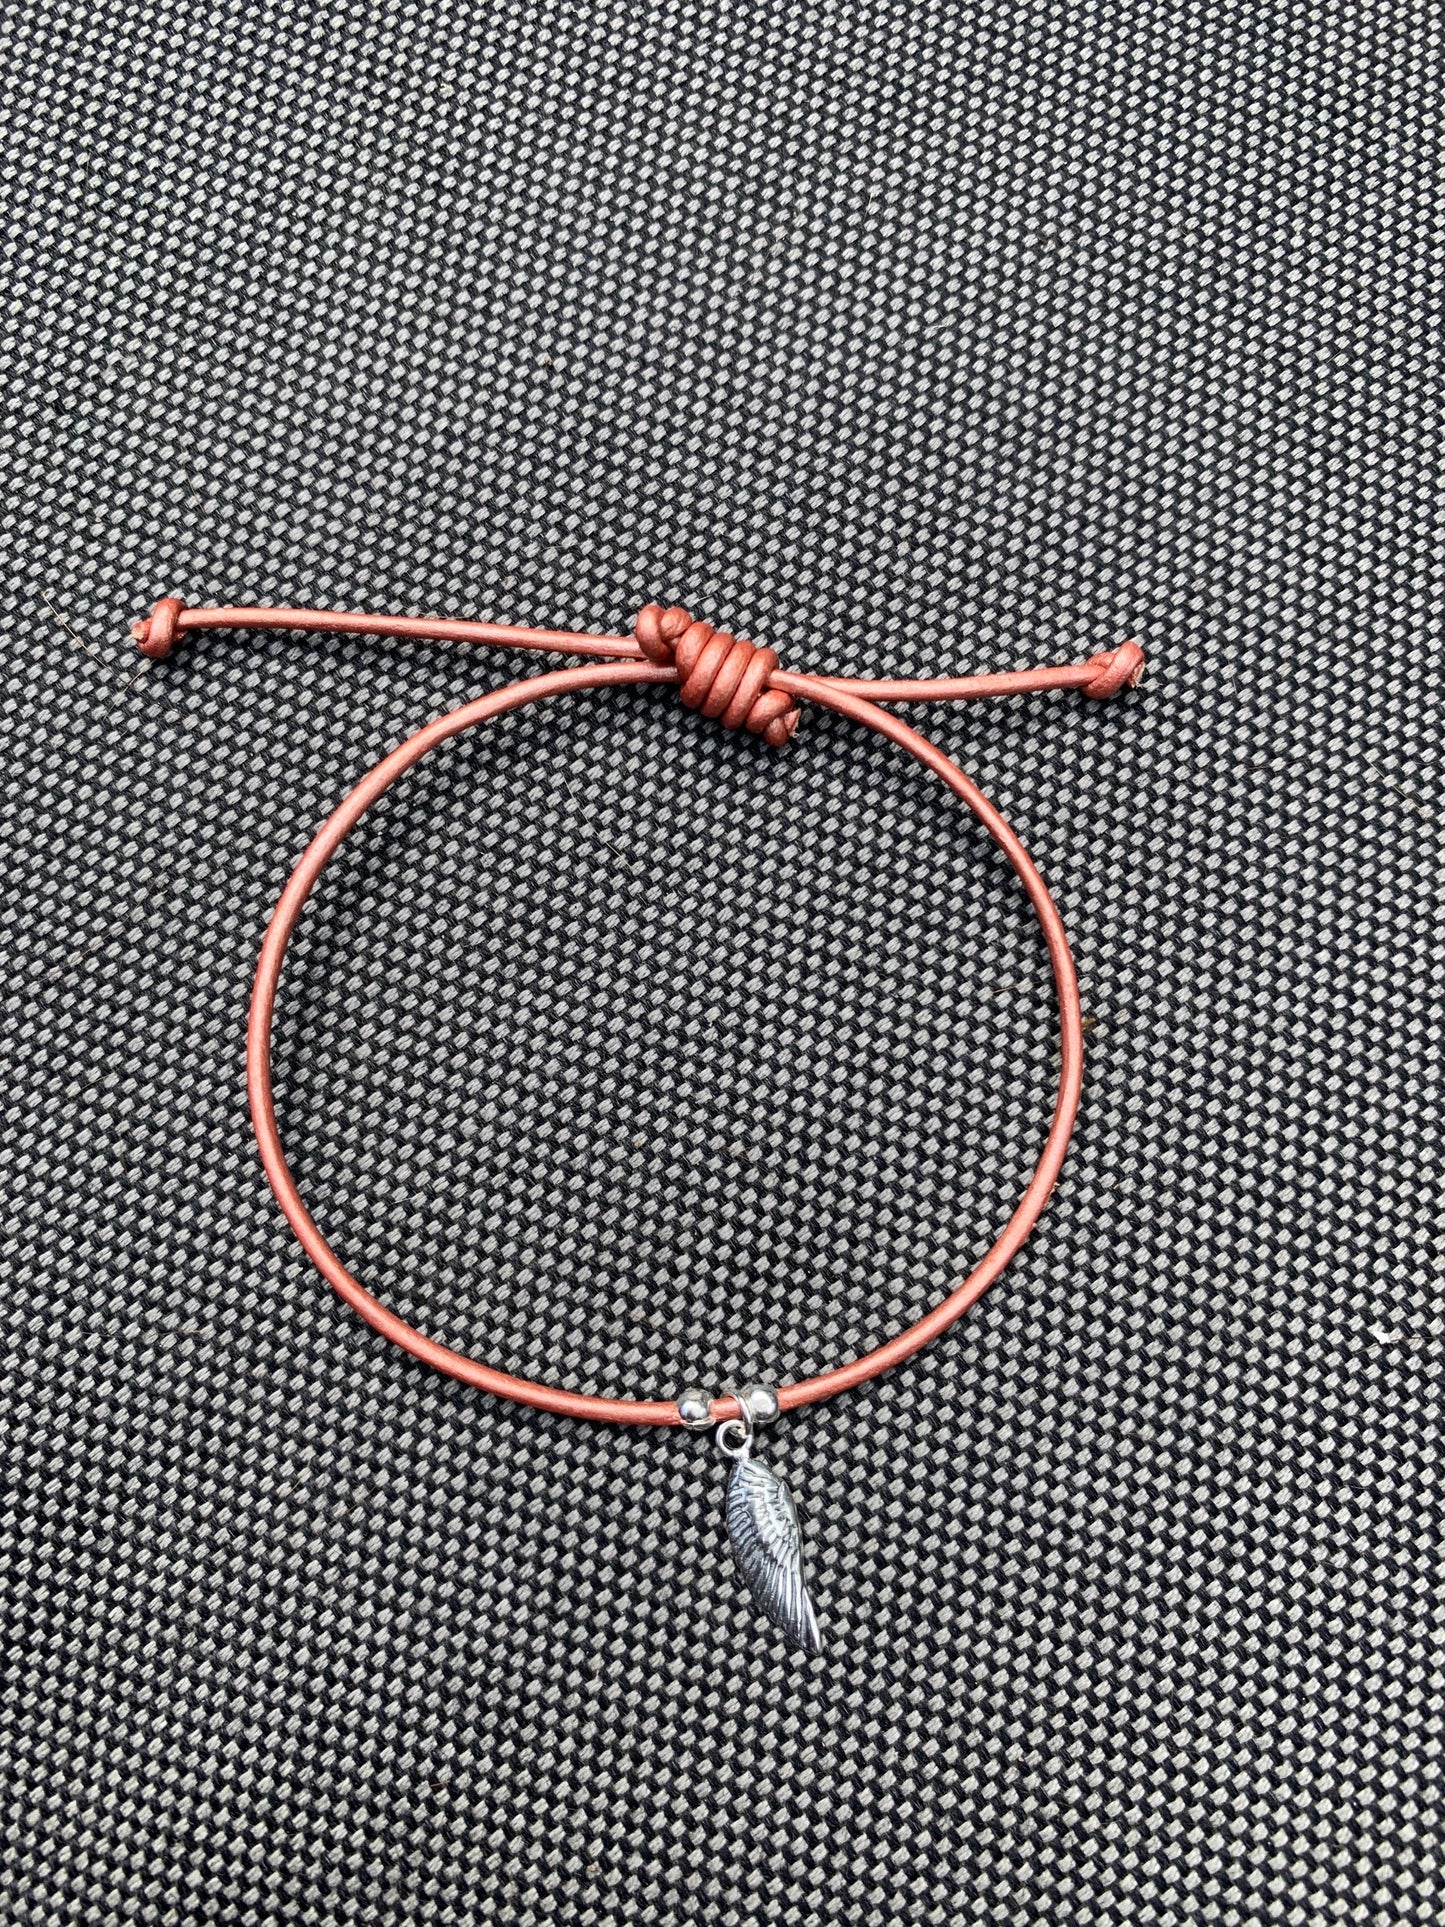 Peach leather with sterling silver charm bracelet